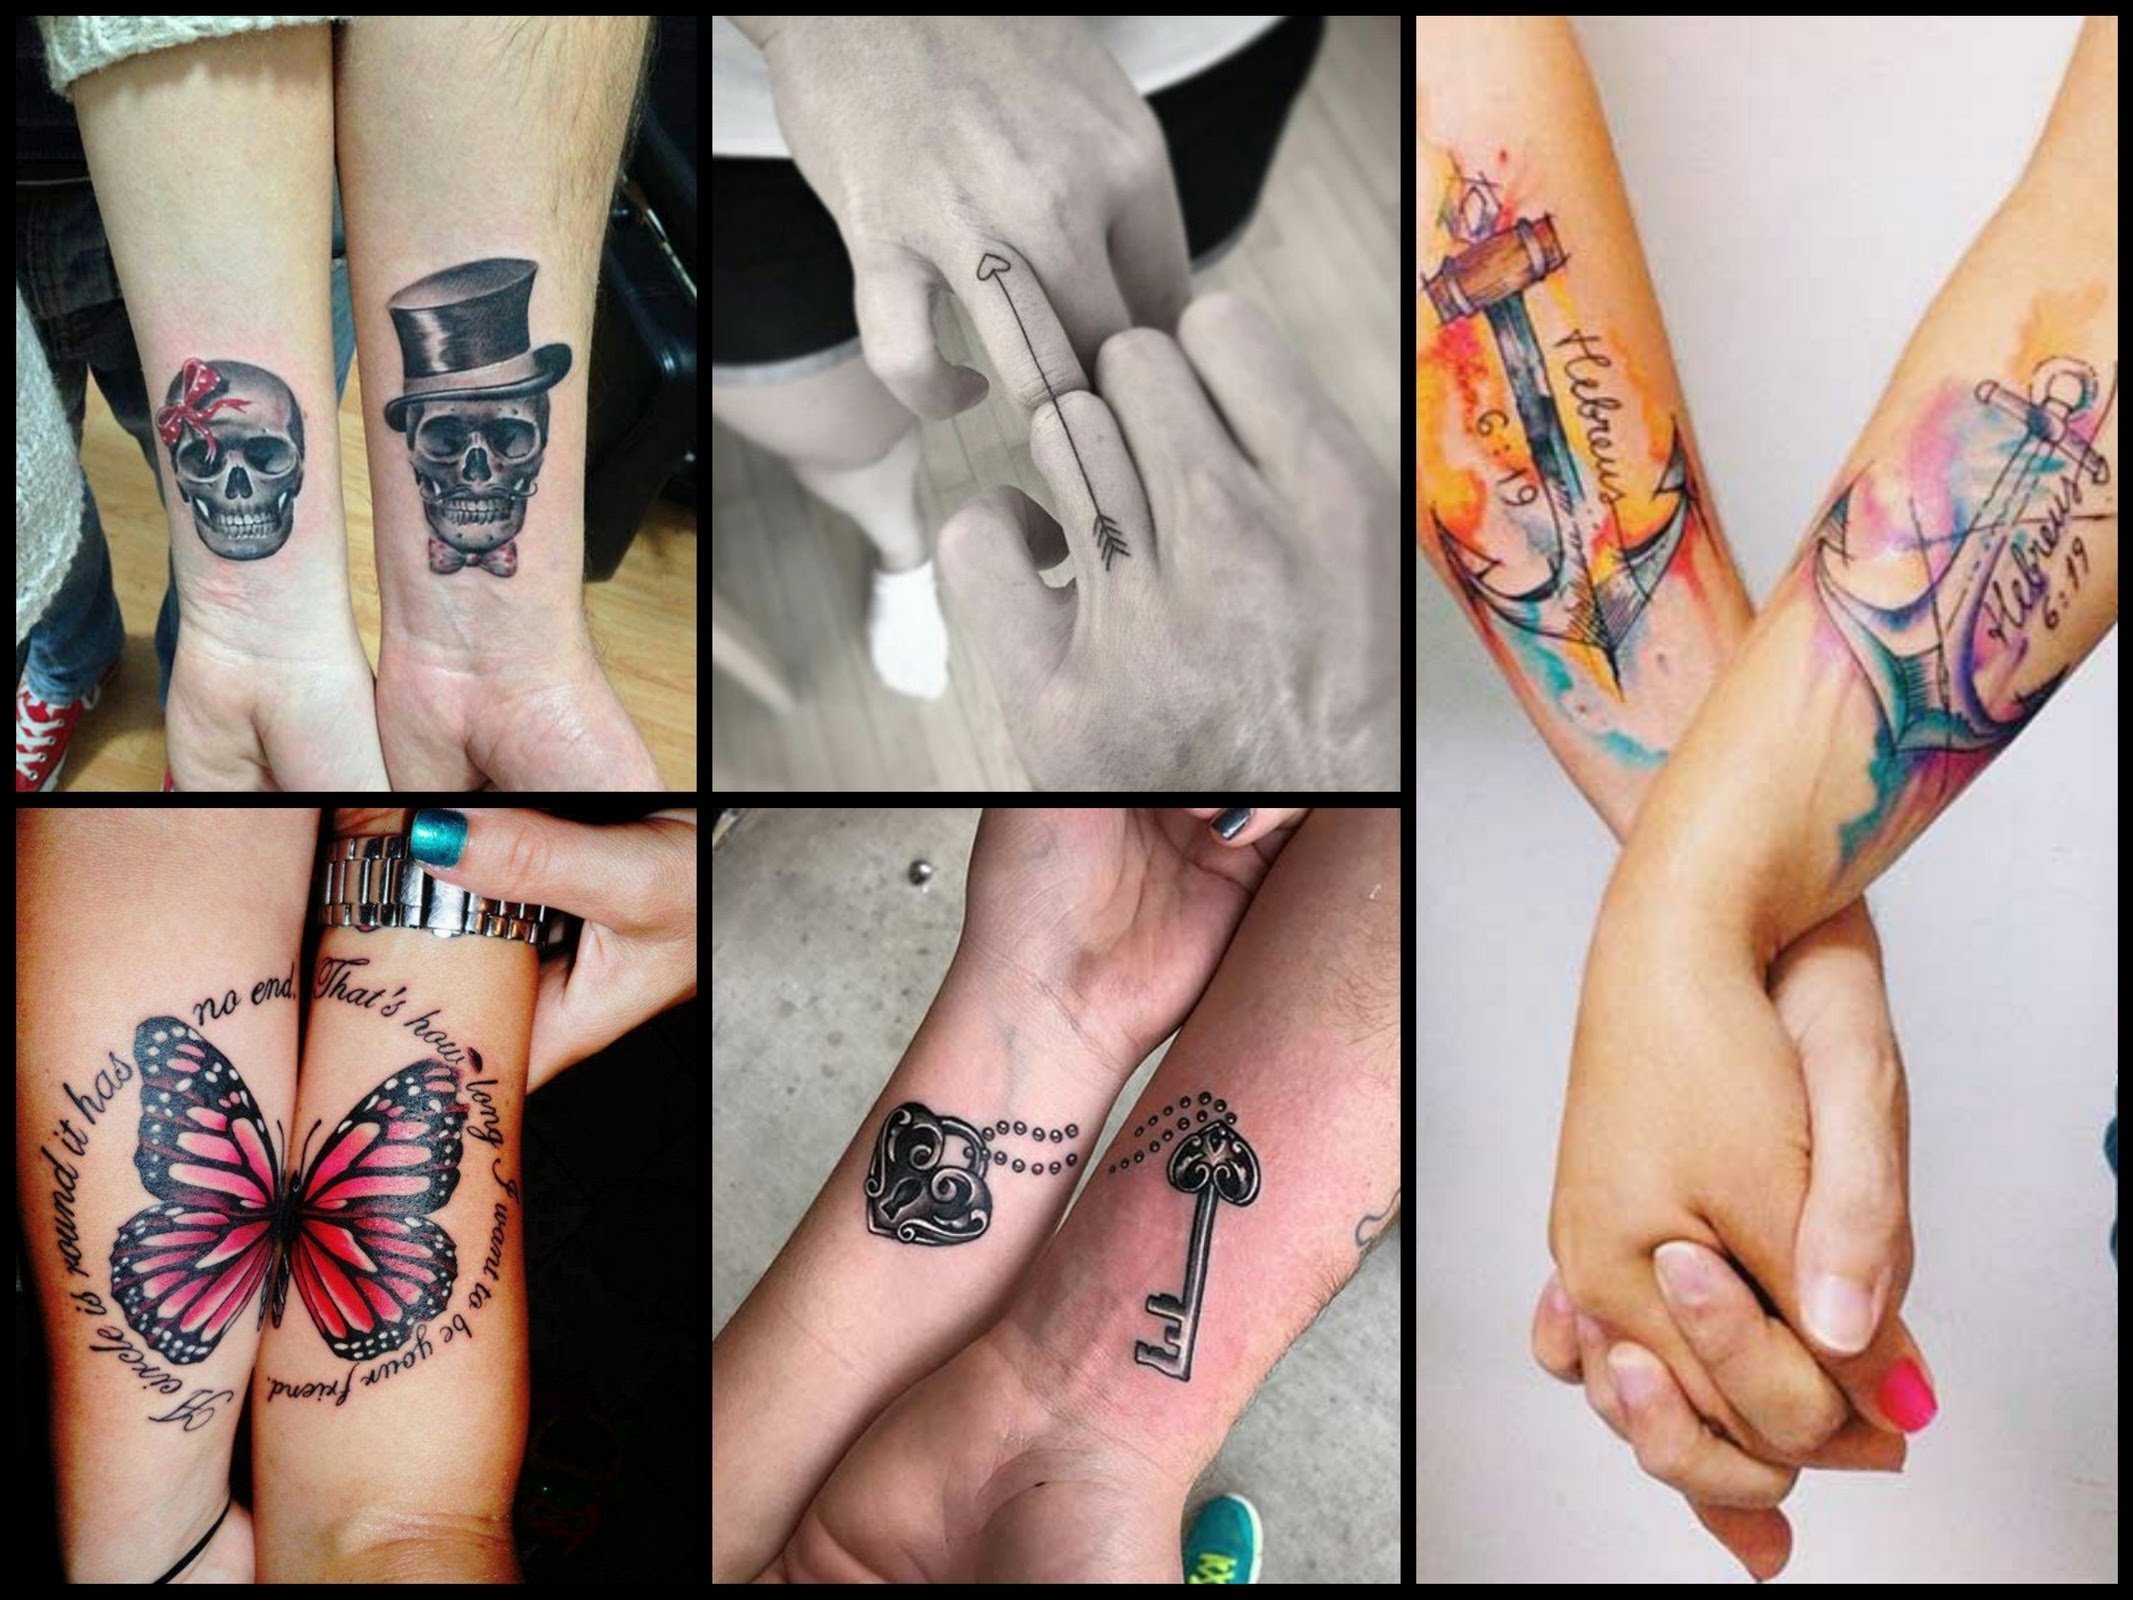 10 Spectacular His And Her Tattoo Ideas 30 best couple tattoo ideas youtube 1 2022